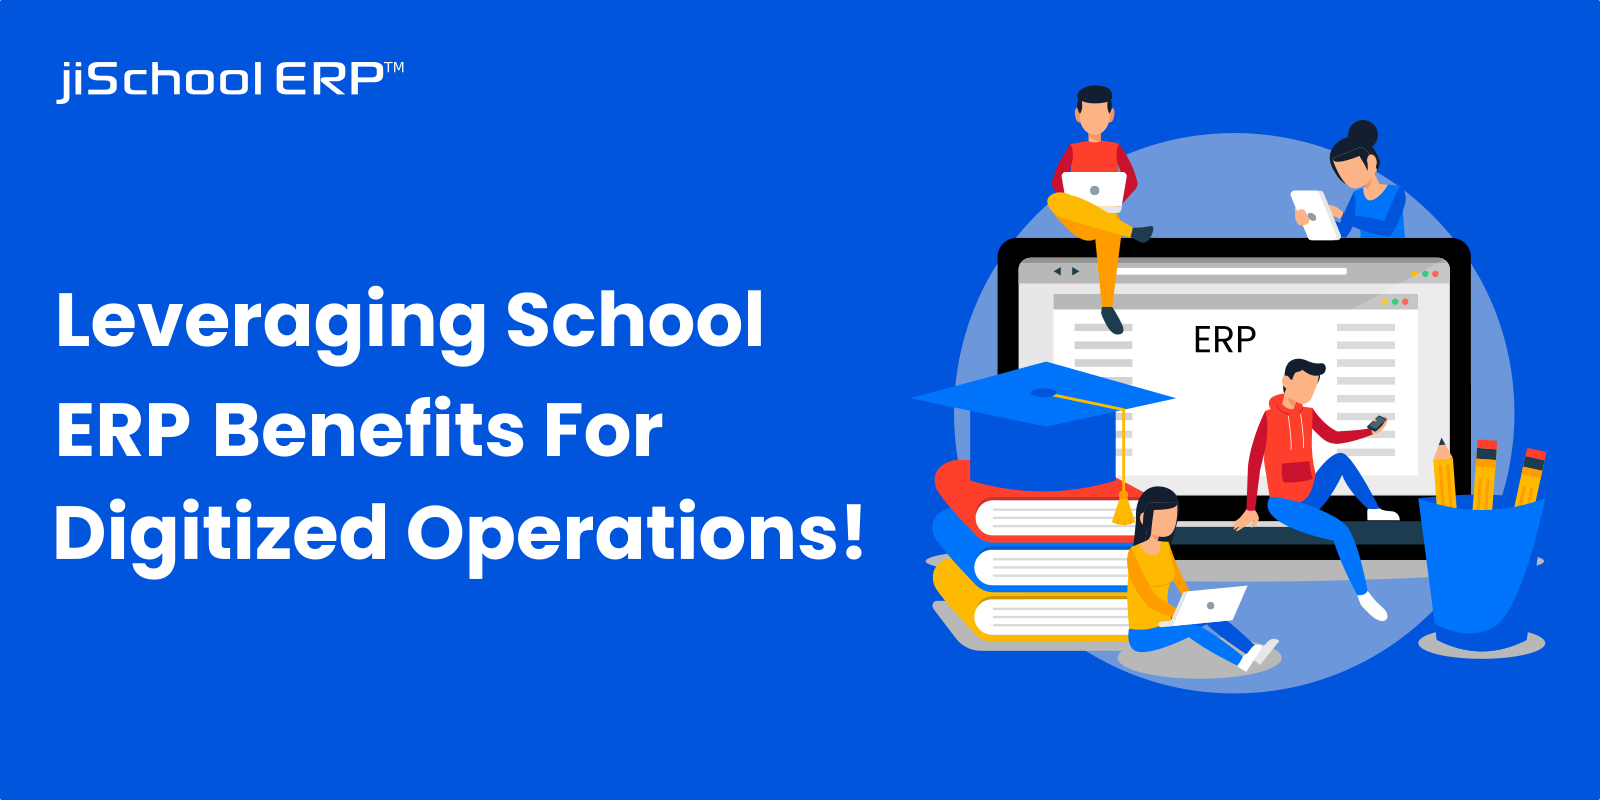 Leveraging School ERP Benefits For Digitized Operations!